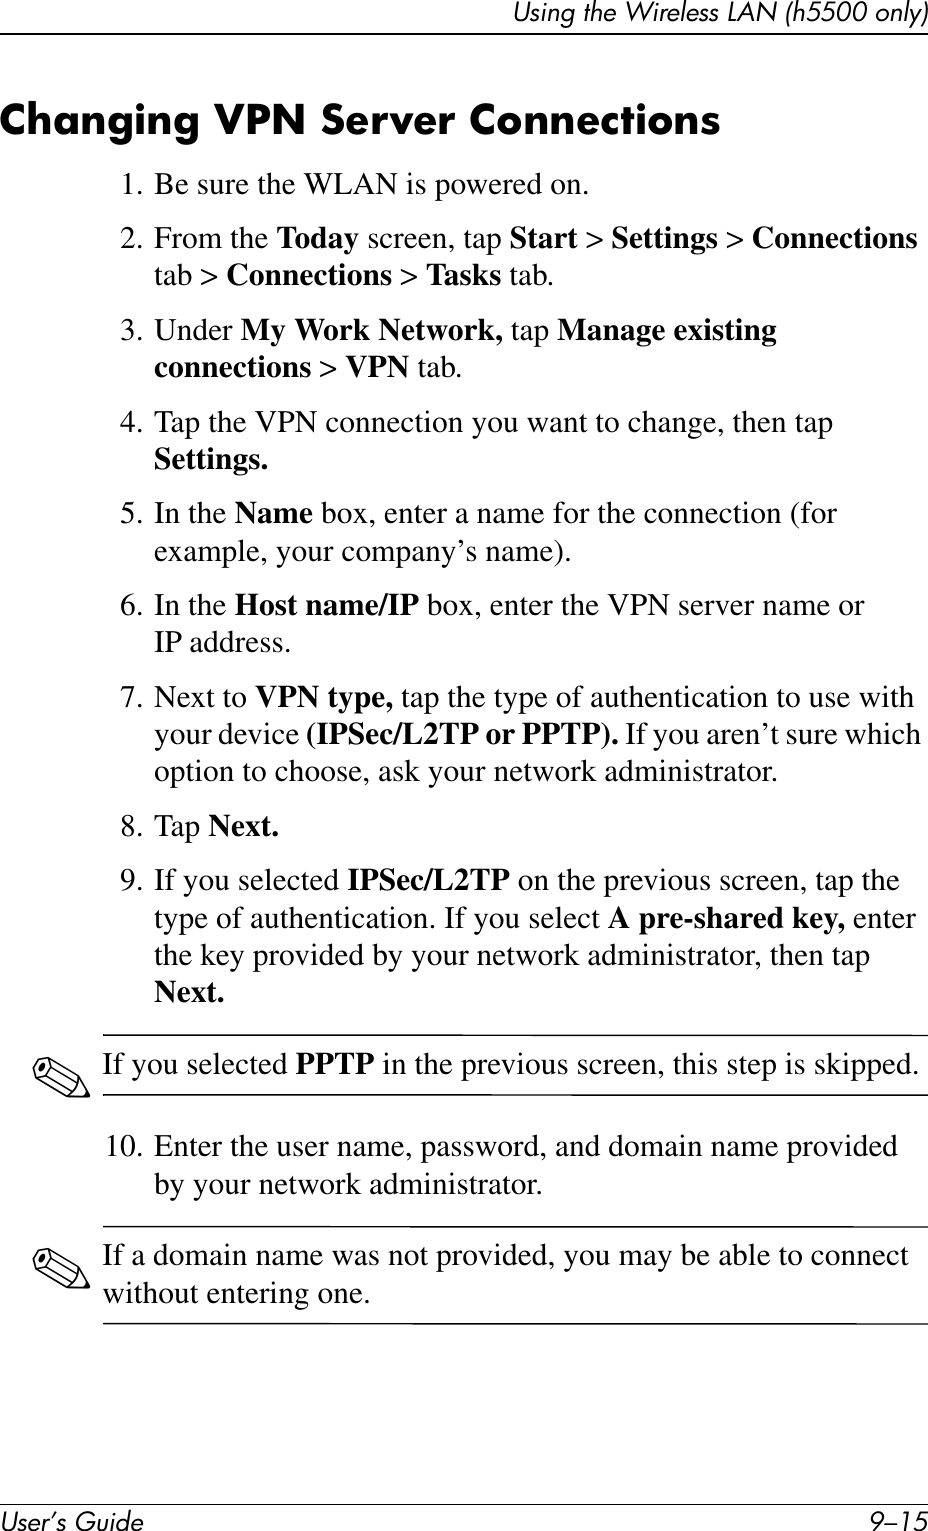 Using the Wireless LAN (h5500 only)User’s Guide 9–15Changing VPN Server Connections1. Be sure the WLAN is powered on.2. From the Today screen, tap Start &gt; Settings &gt; Connections tab &gt; Connections &gt; Tasks tab.3. Under My Work Network, tap Manage existing connections &gt; VPN tab.4. Tap the VPN connection you want to change, then tap Settings.5. In the Name box, enter a name for the connection (for example, your company’s name).6. In the Host name/IP box, enter the VPN server name or IP address.7. Next to VPN type, tap the type of authentication to use with your device (IPSec/L2TP or PPTP). If you aren’t sure which option to choose, ask your network administrator.8. Tap Next.9. If you selected IPSec/L2TP on the previous screen, tap the type of authentication. If you select A pre-shared key, enter the key provided by your network administrator, then tap Next.✎If you selected PPTP in the previous screen, this step is skipped.10. Enter the user name, password, and domain name provided by your network administrator.✎If a domain name was not provided, you may be able to connect without entering one.